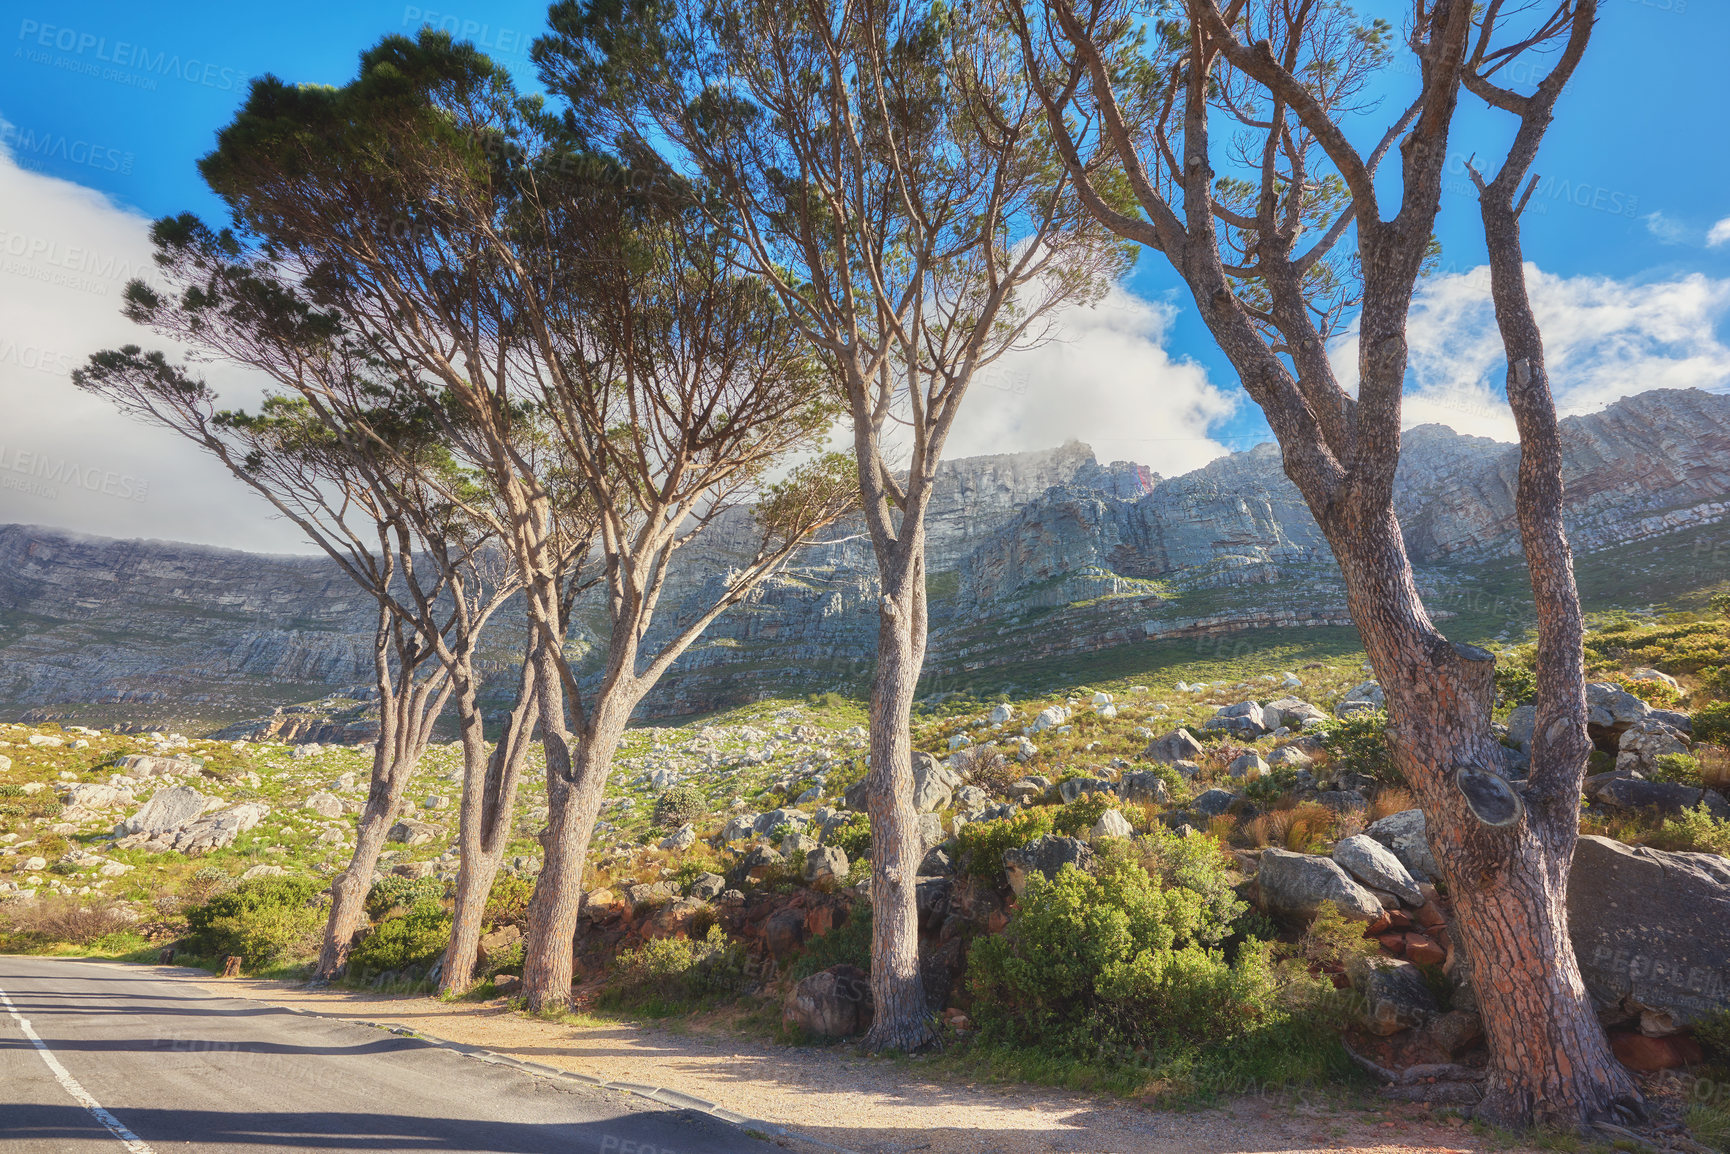 Buy stock photo Landscape scenic view with blue sky and clouds. Hiking and trekking terrain with growing trees, shrubs, and bushes with a winding road in Table Mountain National Park, Cape Town, South Africa